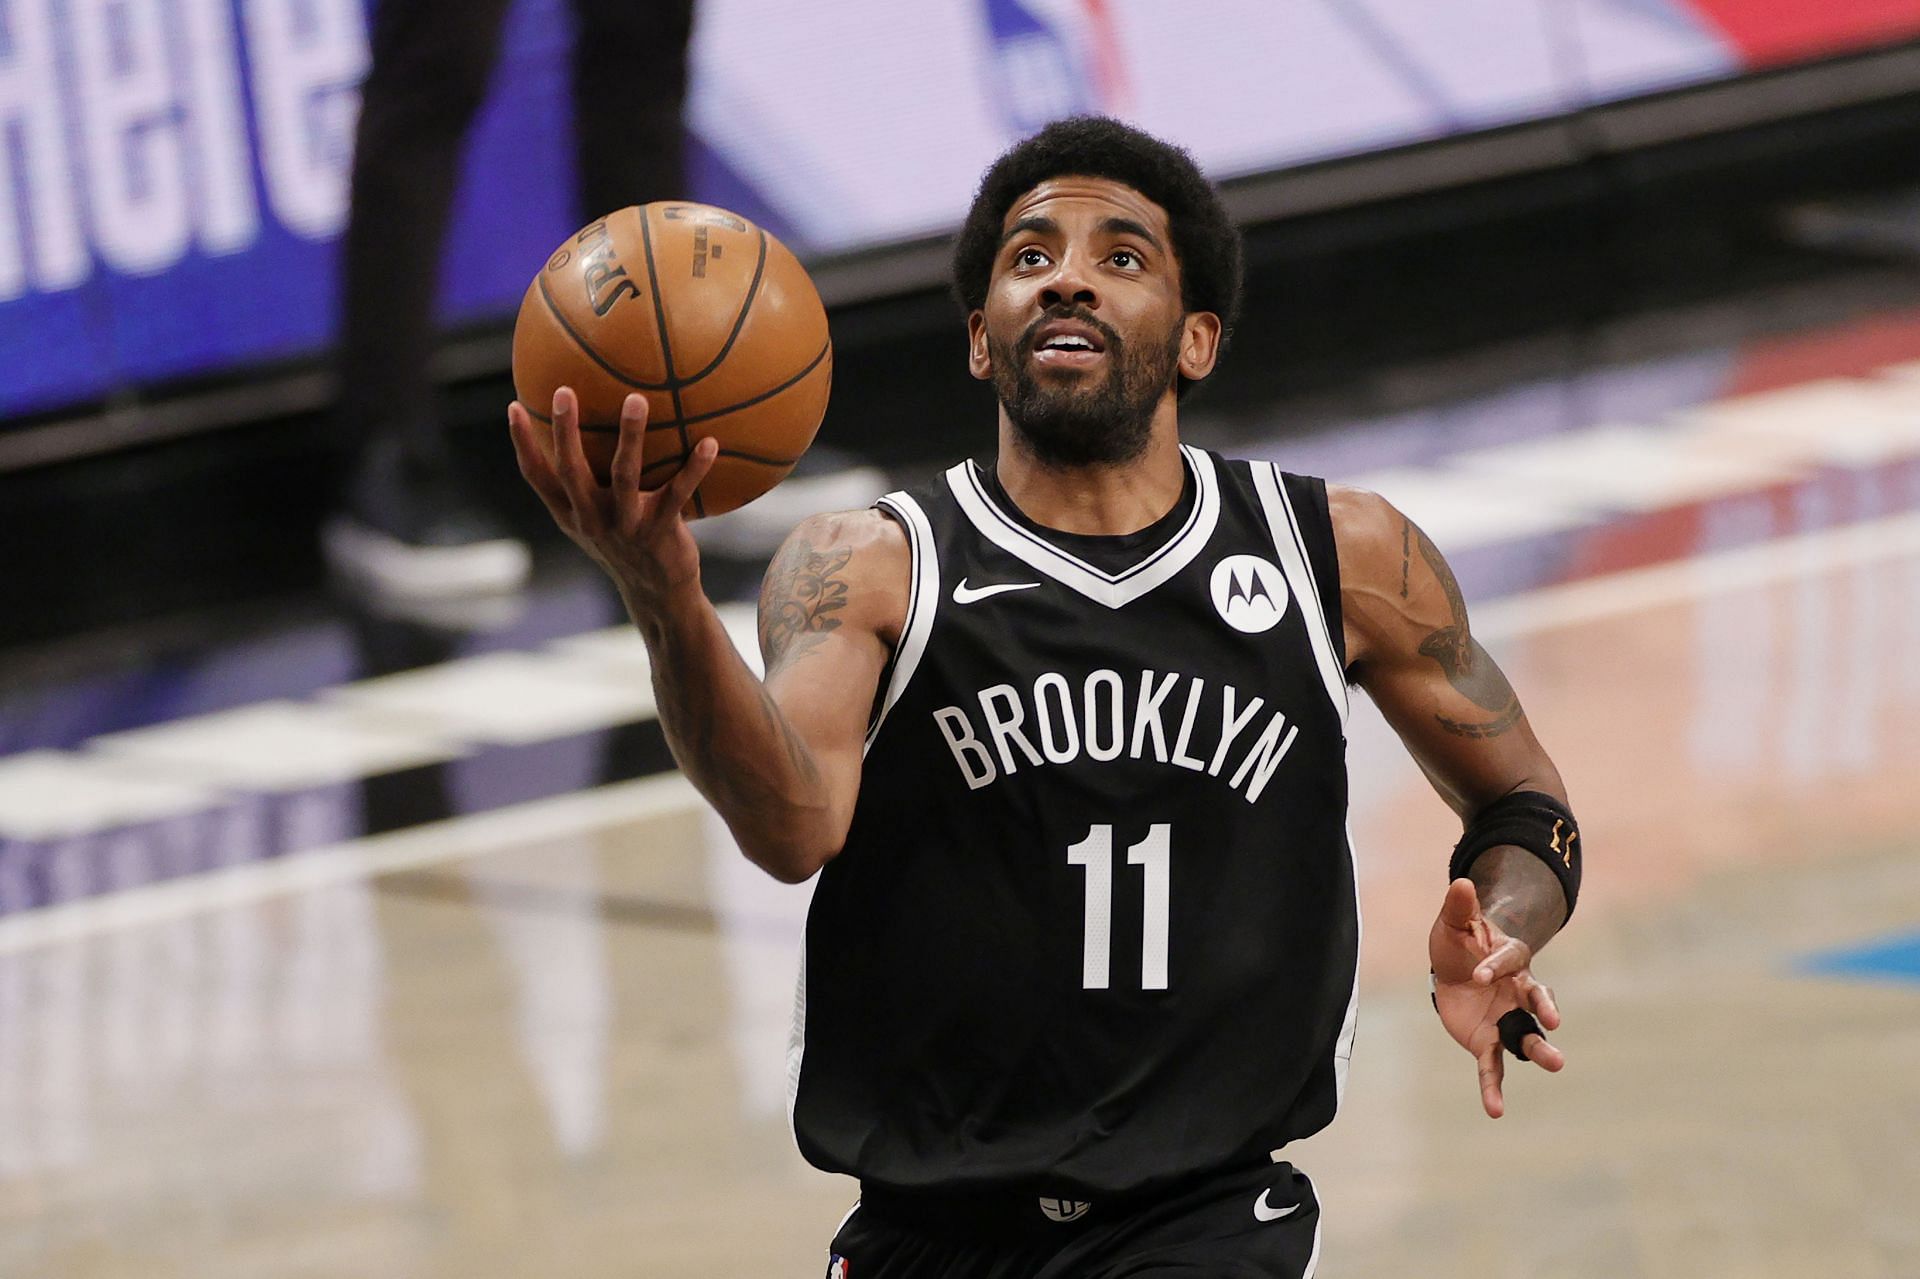 Brooklyn Nets All-Star Kyrie Irving going up for a layup